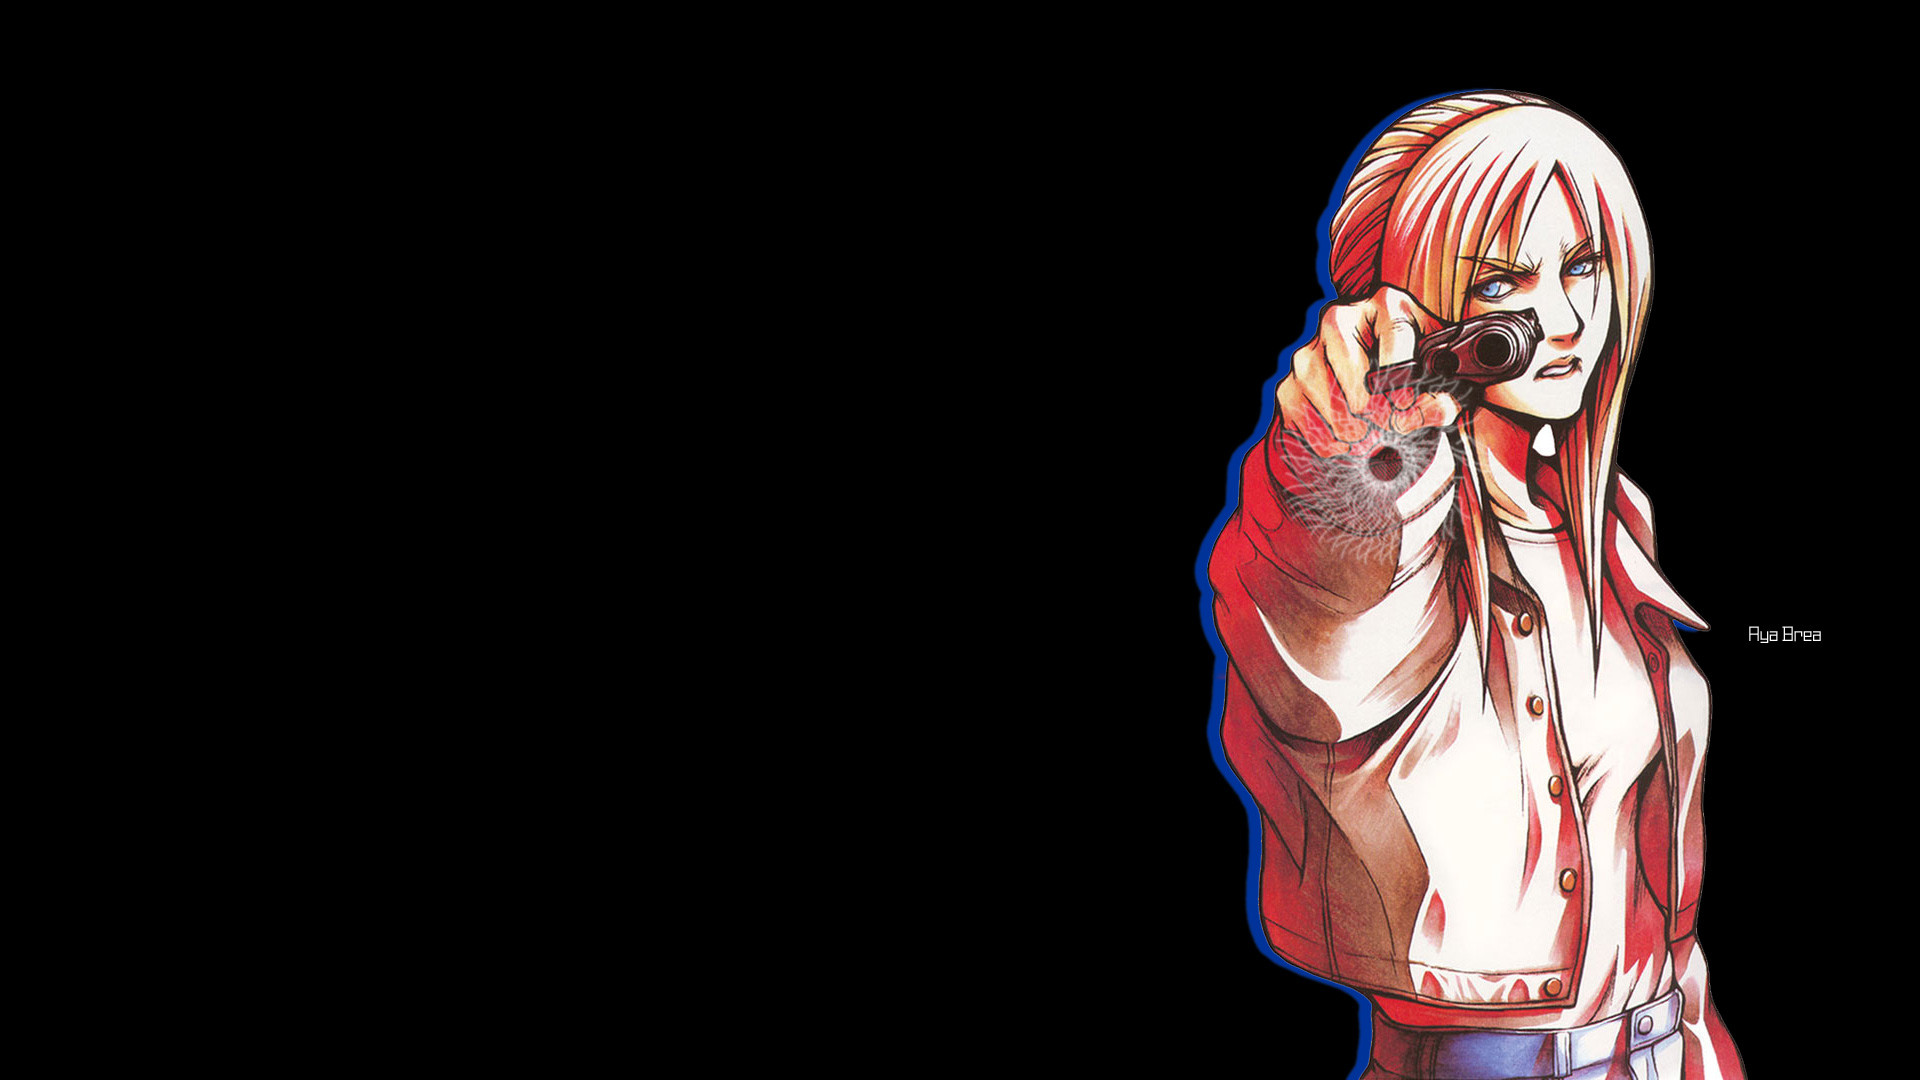 1920x1080 Free parasite eve wallpaper background